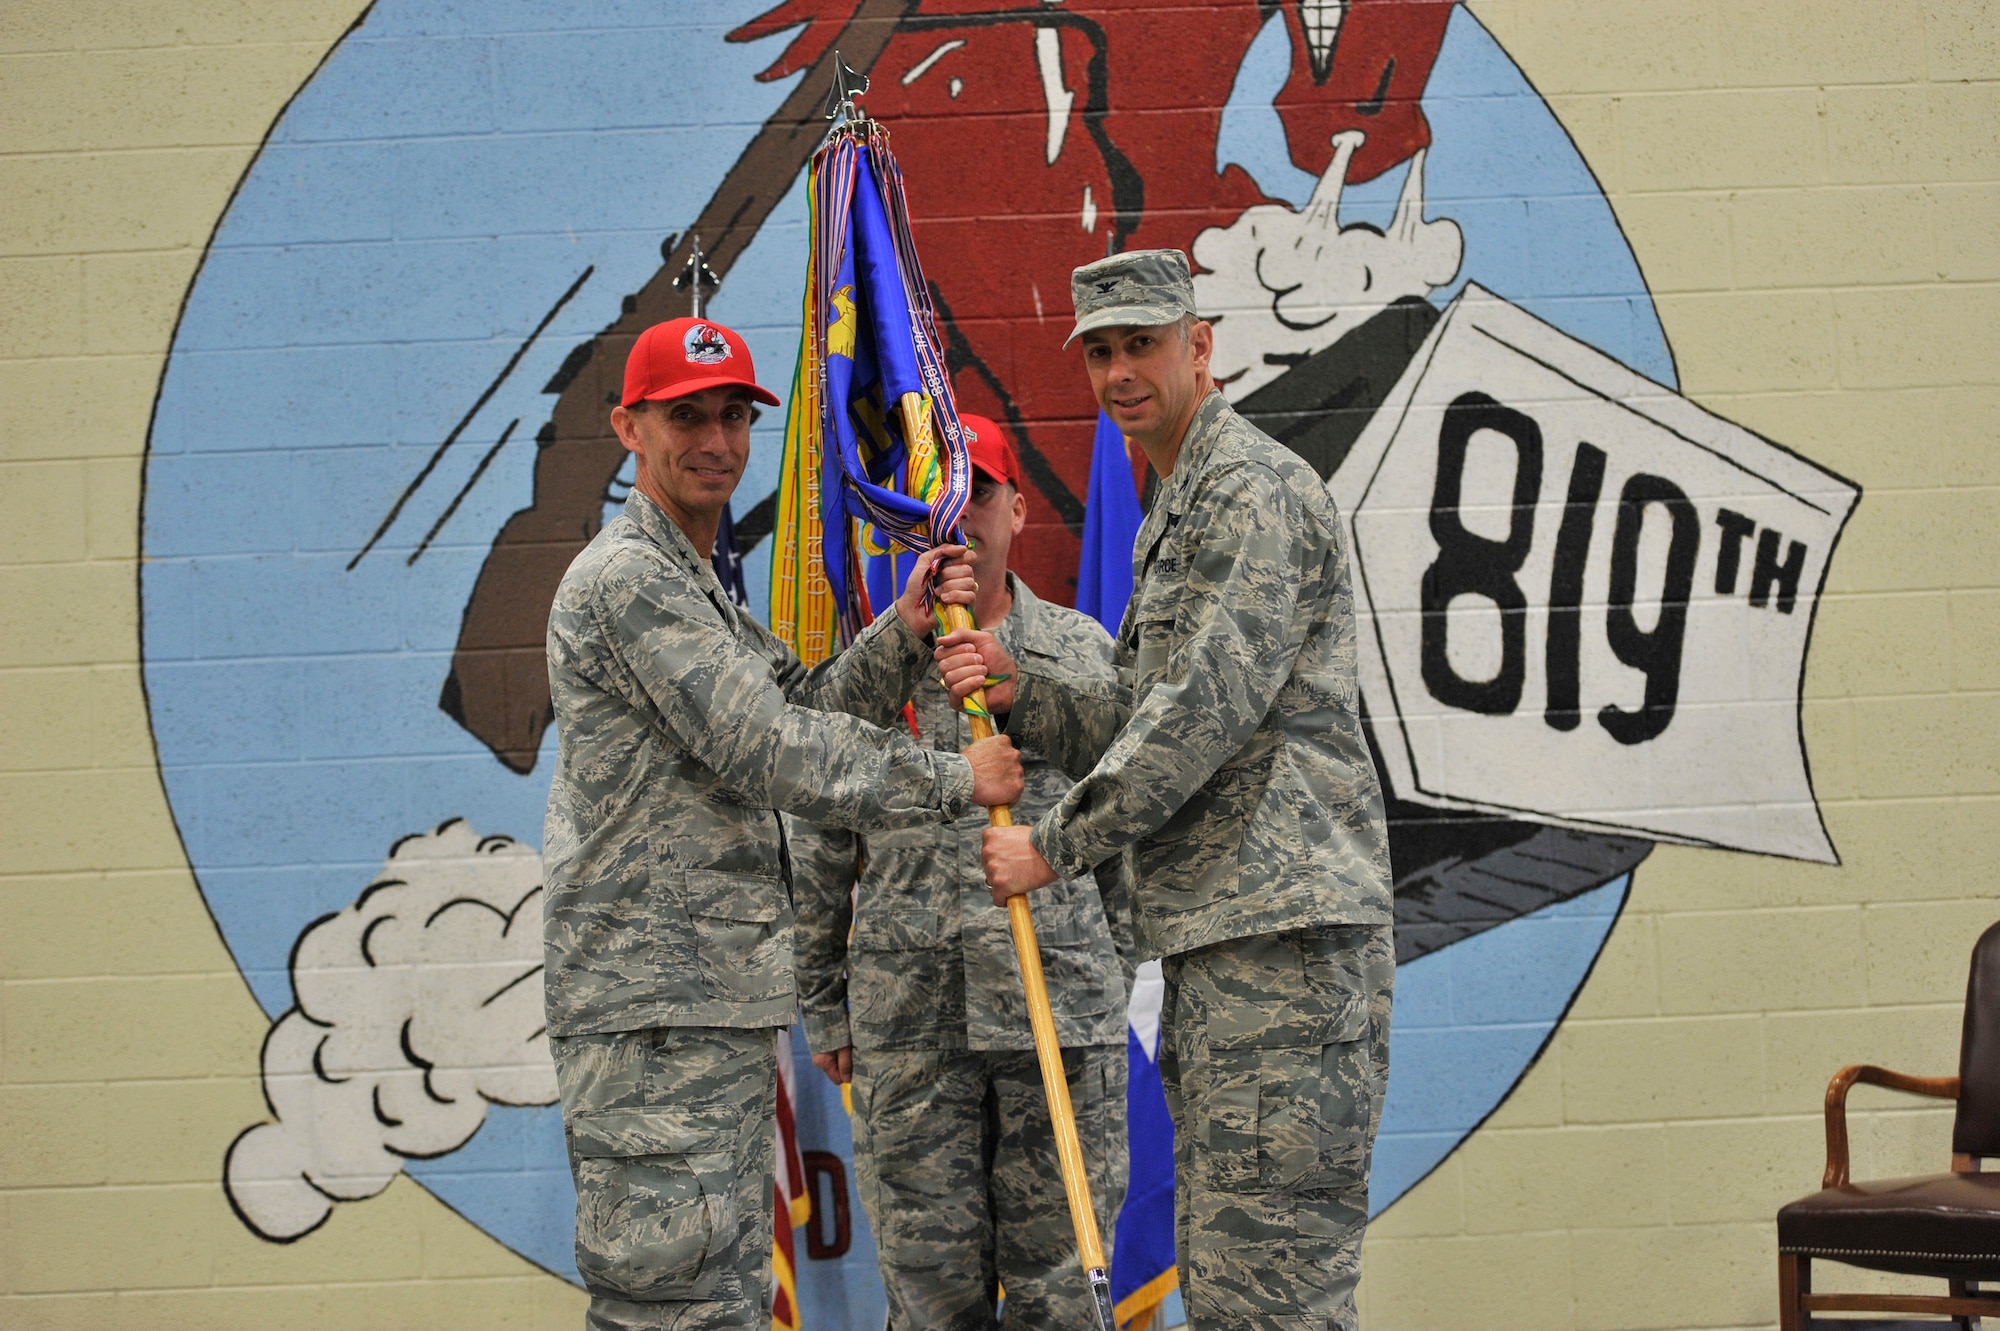 U.S. Air Force Col. Jason Loschinskey, right, assumes command of the 819th Rapid Engineer Deployable Heavy Operational Repair Squadron Engineers (RED HORSE) from Maj. Gen. Scott J. Zobrist, 9th Air Force commander, as Senior Master Sgt. Craig Houchins, 819th RHS guidion bearer, looks on during a ceremony at Malmstrom Air Force Base, Mont., June 6, 2018. Loschinskey was previously the deputy commander for the 71st Mission Support Group at Vance AFB, Calif. The 819th RHS is a self-sufficient, 240-person mobile squadron capable of rapid response and independent operations in remote, austere environments worldwide.  (U.S. Air Force photo by John Turner)